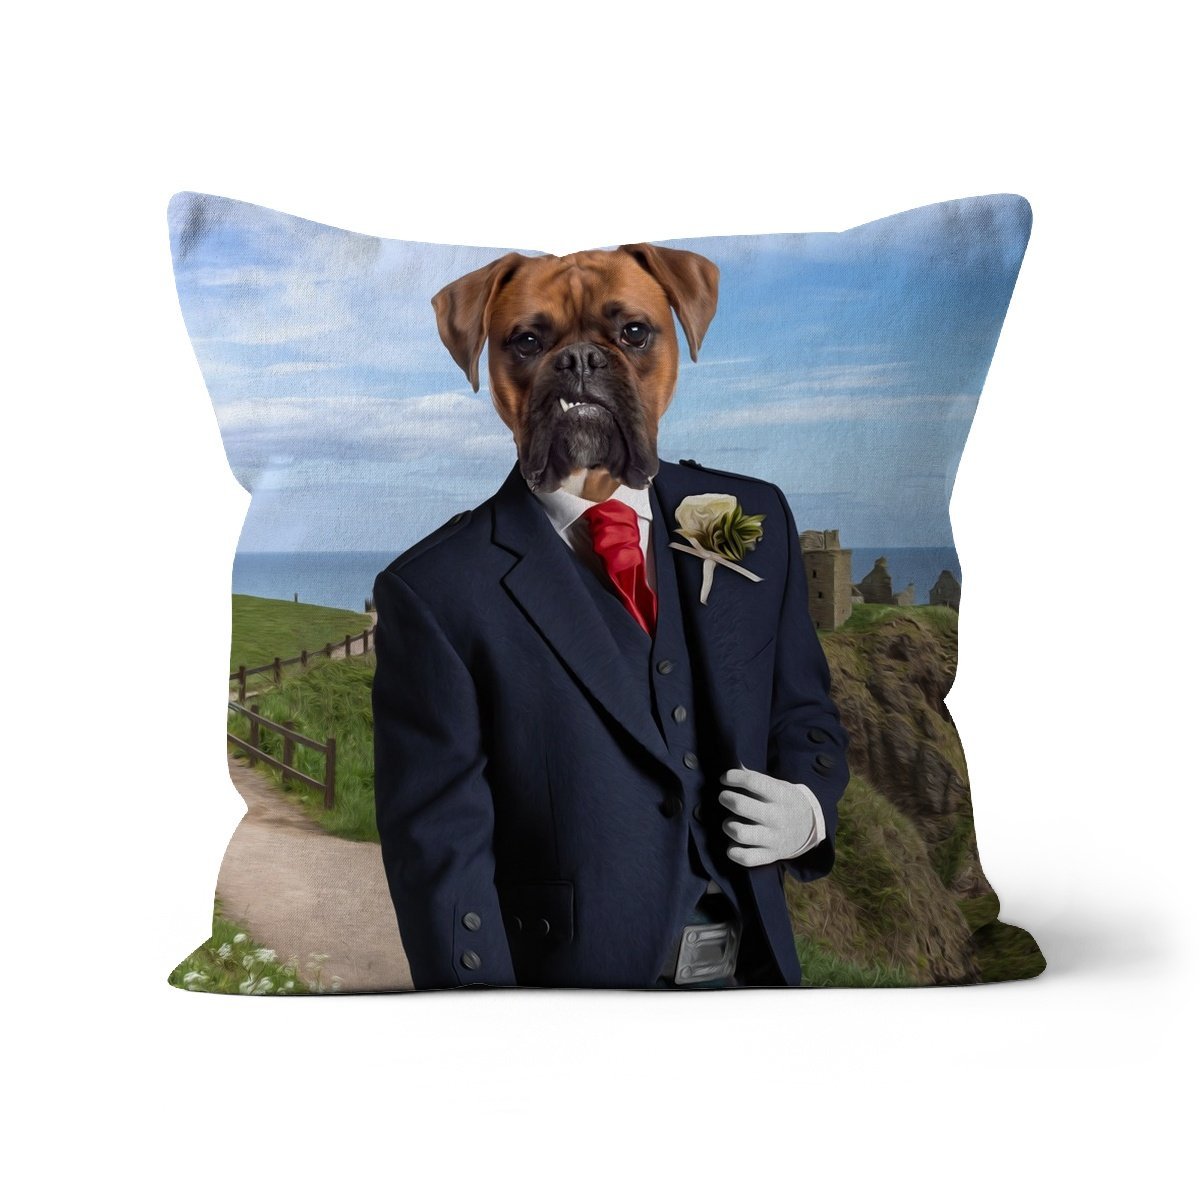 The Scottish Gent: Custom Pet Cushion - Paw & Glory - #pet portraits# - #dog portraits# - #pet portraits uk#paw and glory, custom pet portrait cushion,personalised dog pillows, dog photo on pillow, pillow with dogs face, dog pillow cases, pillow custom, pet custom pillow